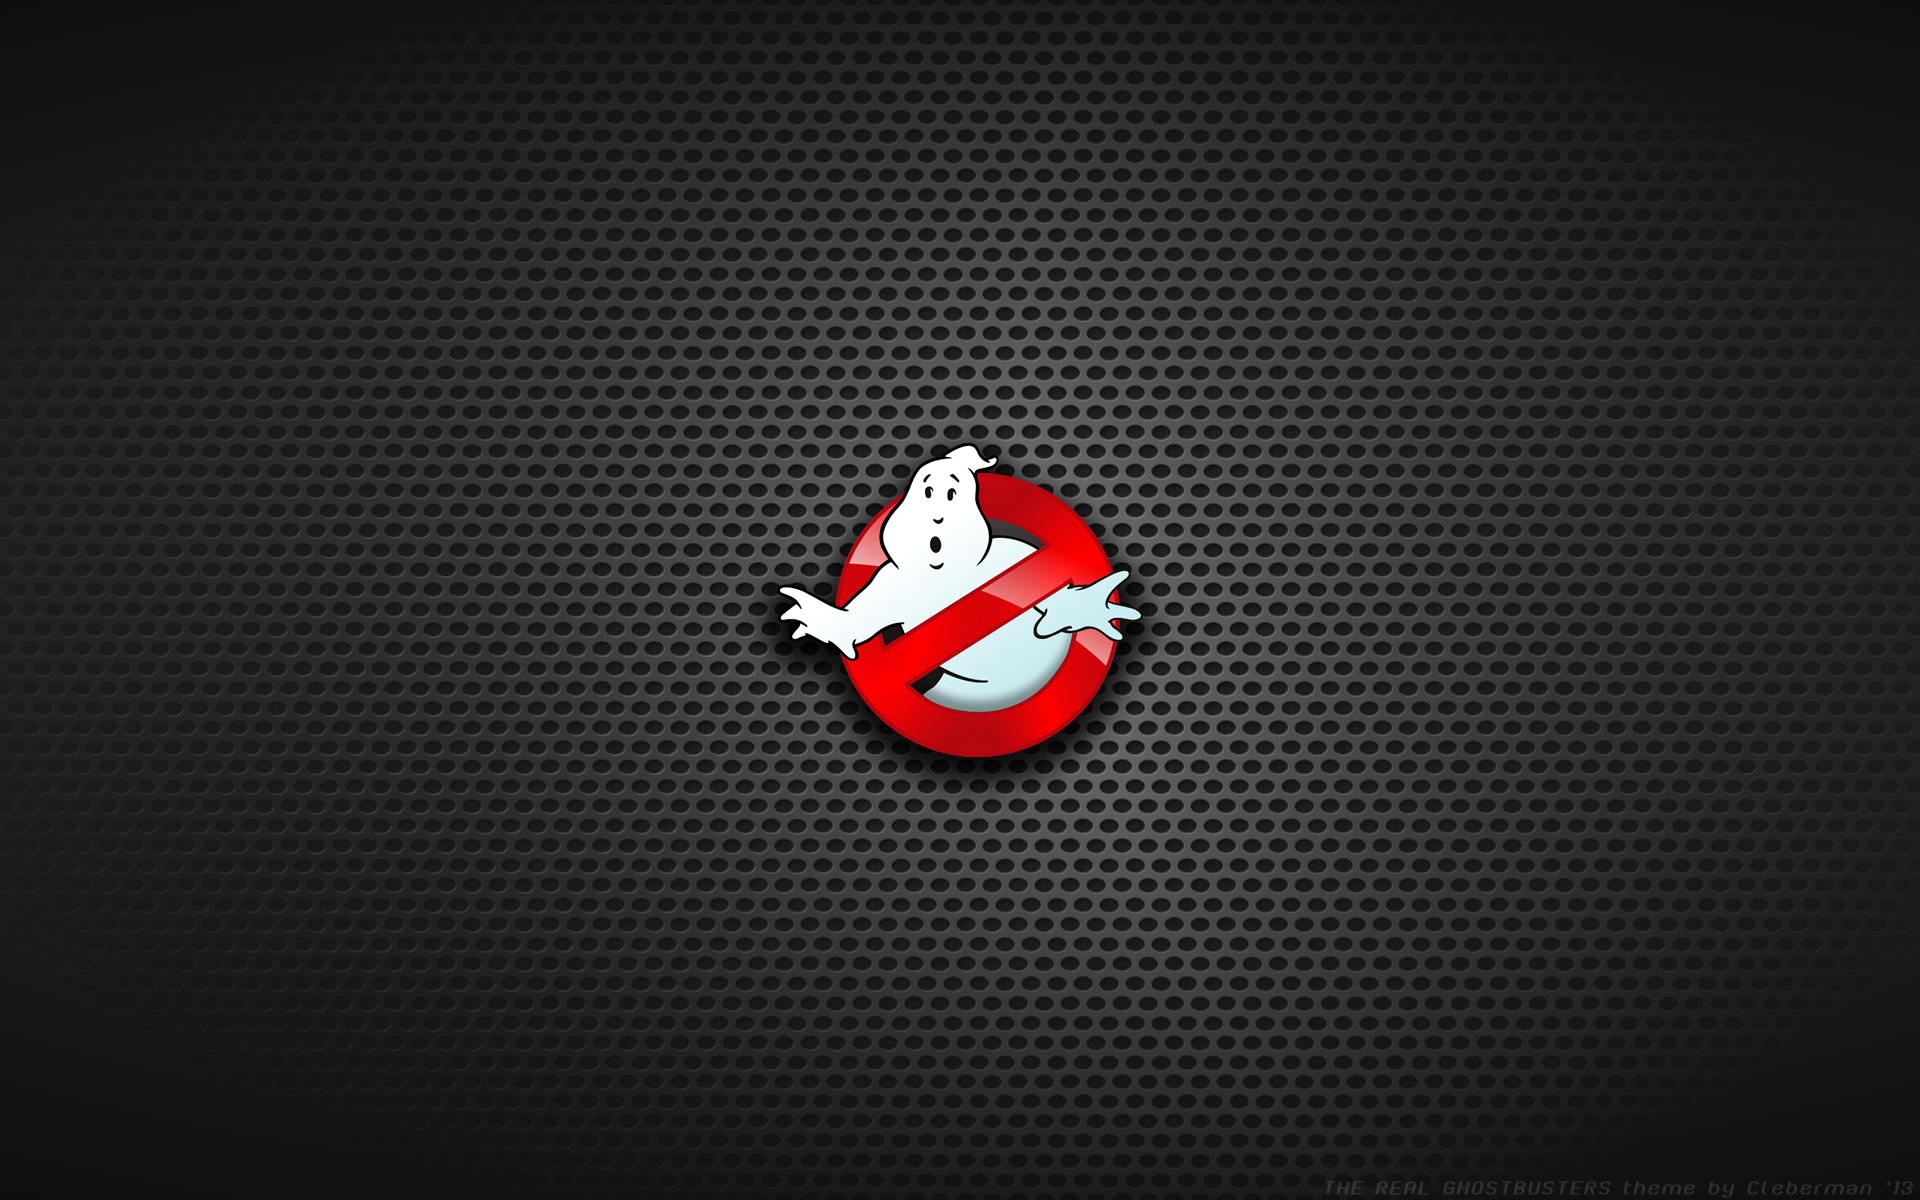 Windows Backgrounds movie, ghostbusters, logo